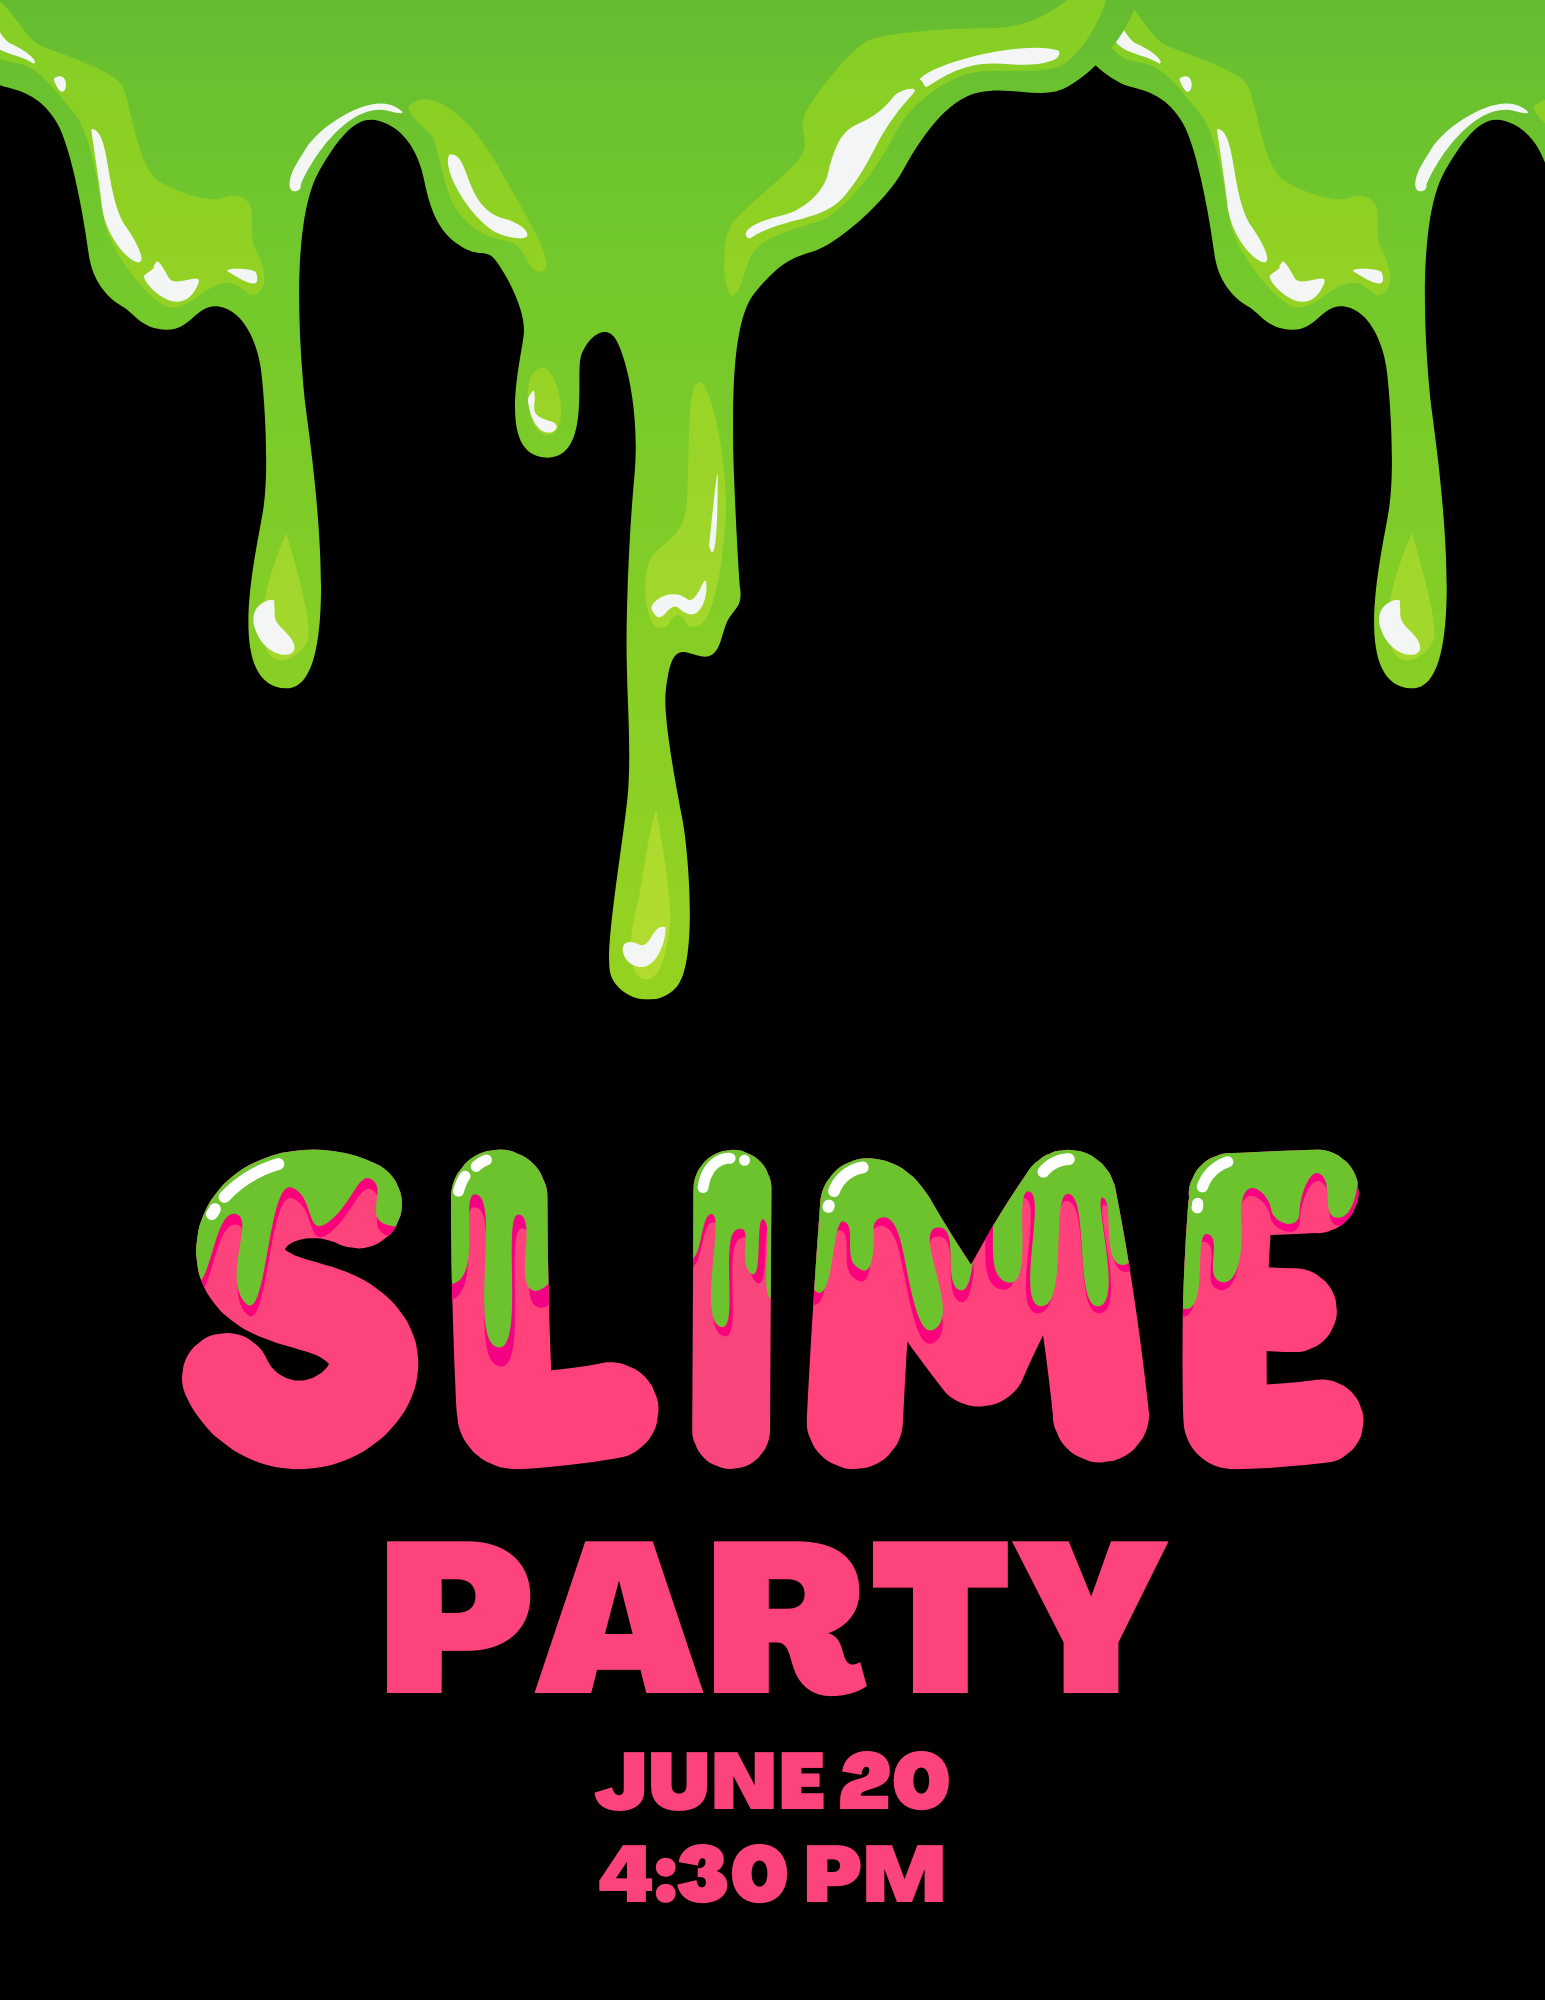 FLYER WITH WORDS SLIME PARTY JUNE 20 4:30 PM